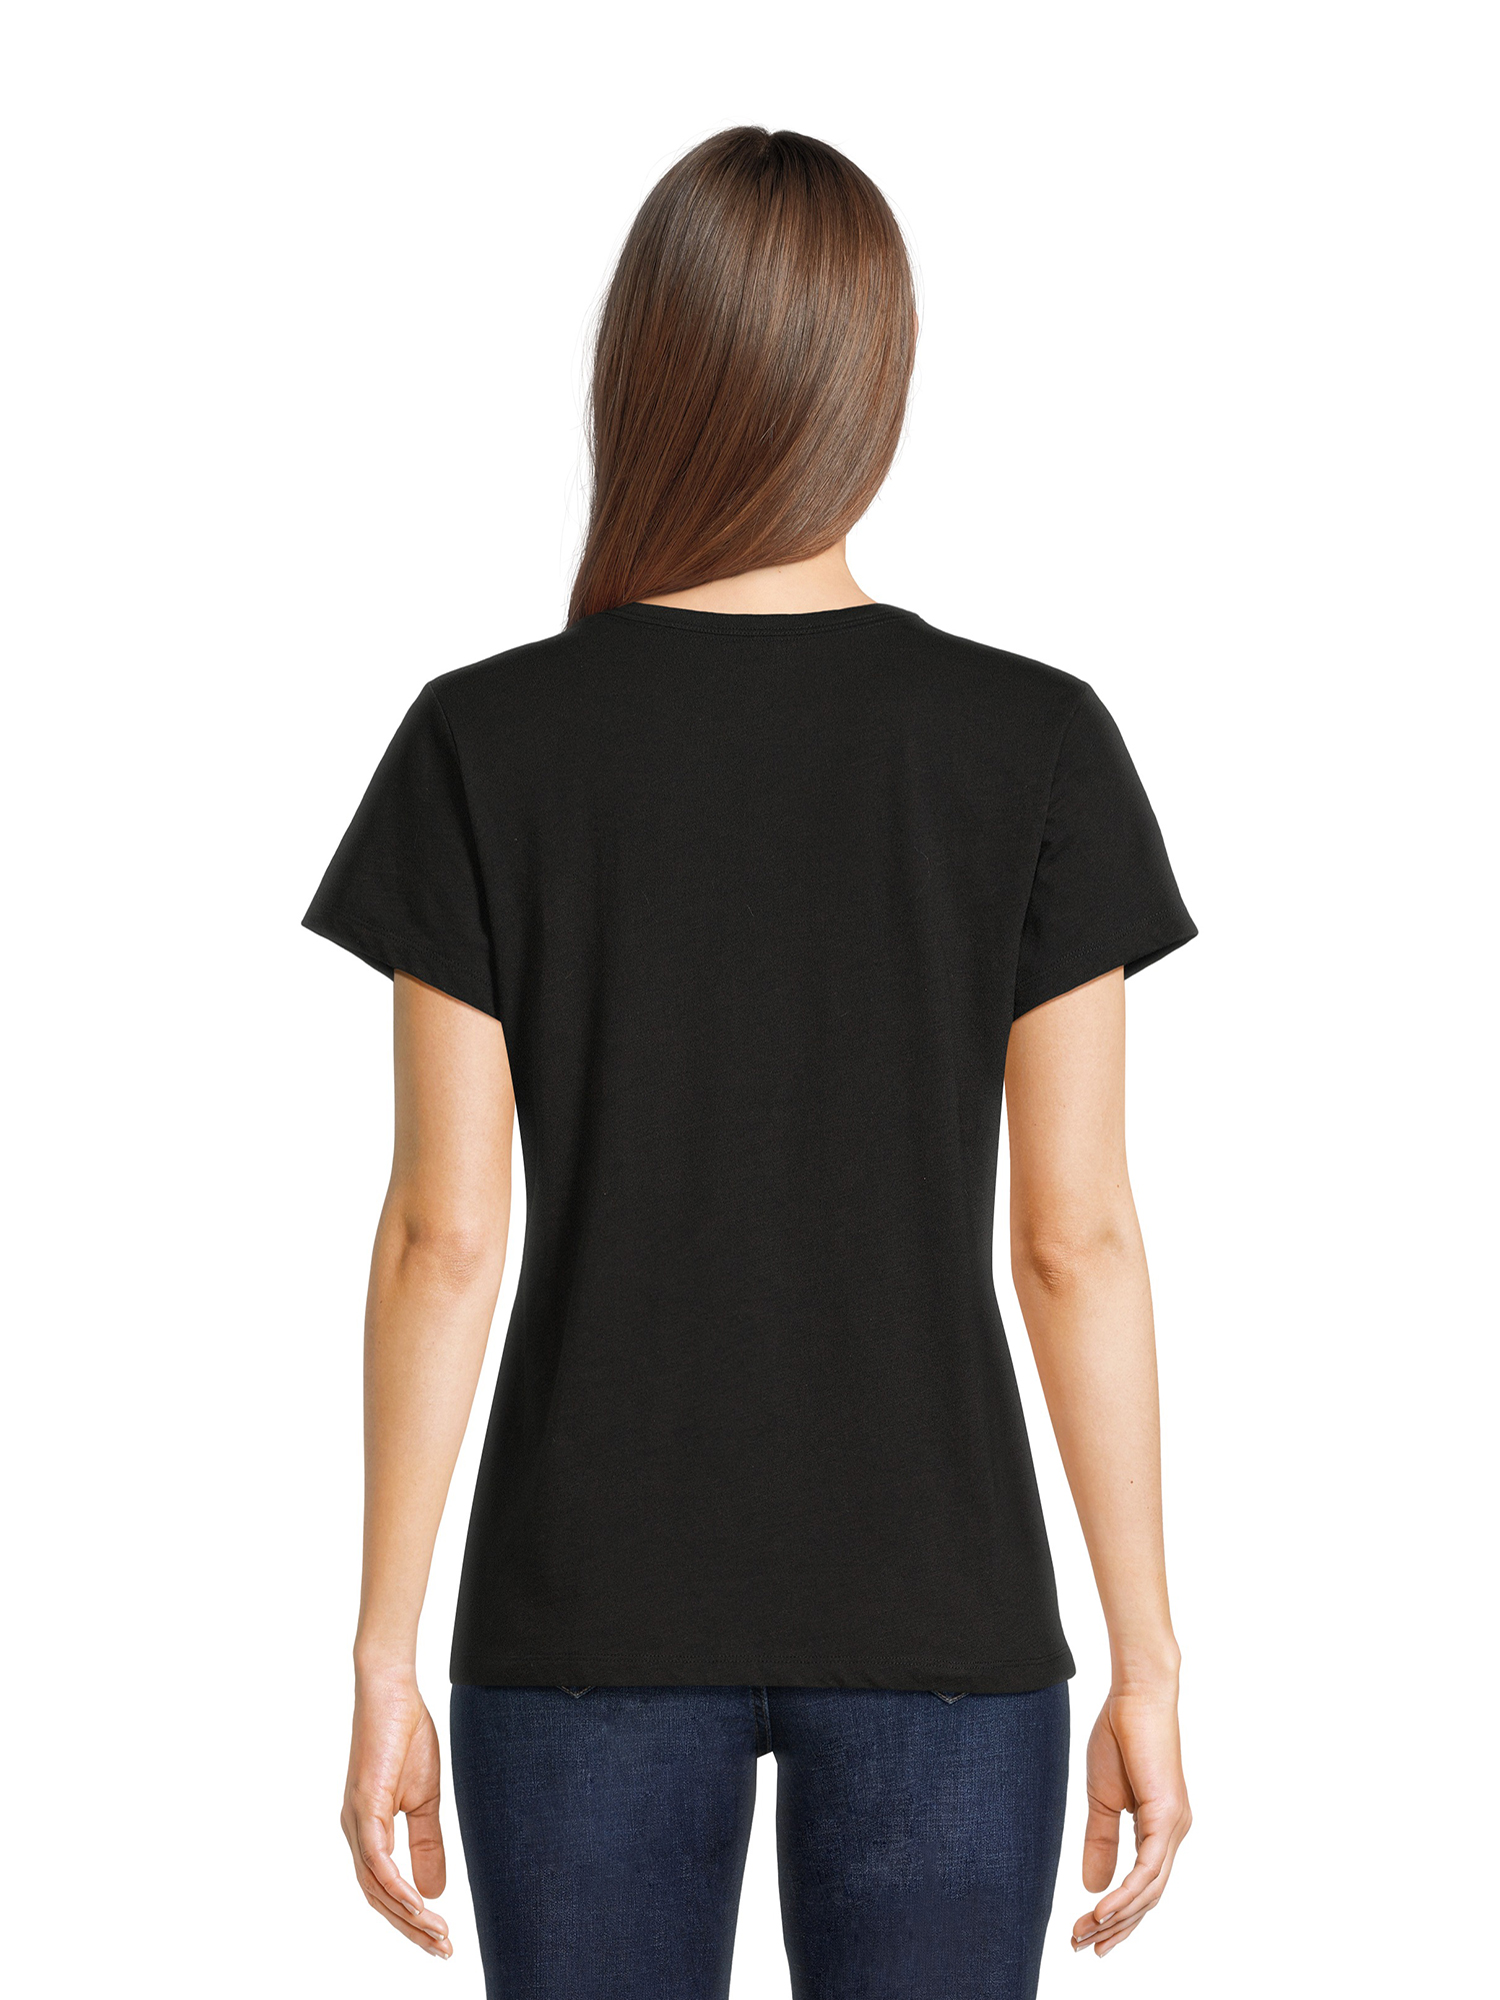 Time and Tru Women's Slub Texture Tee with Short Sleeves, Sizes S-XXXL - image 5 of 6